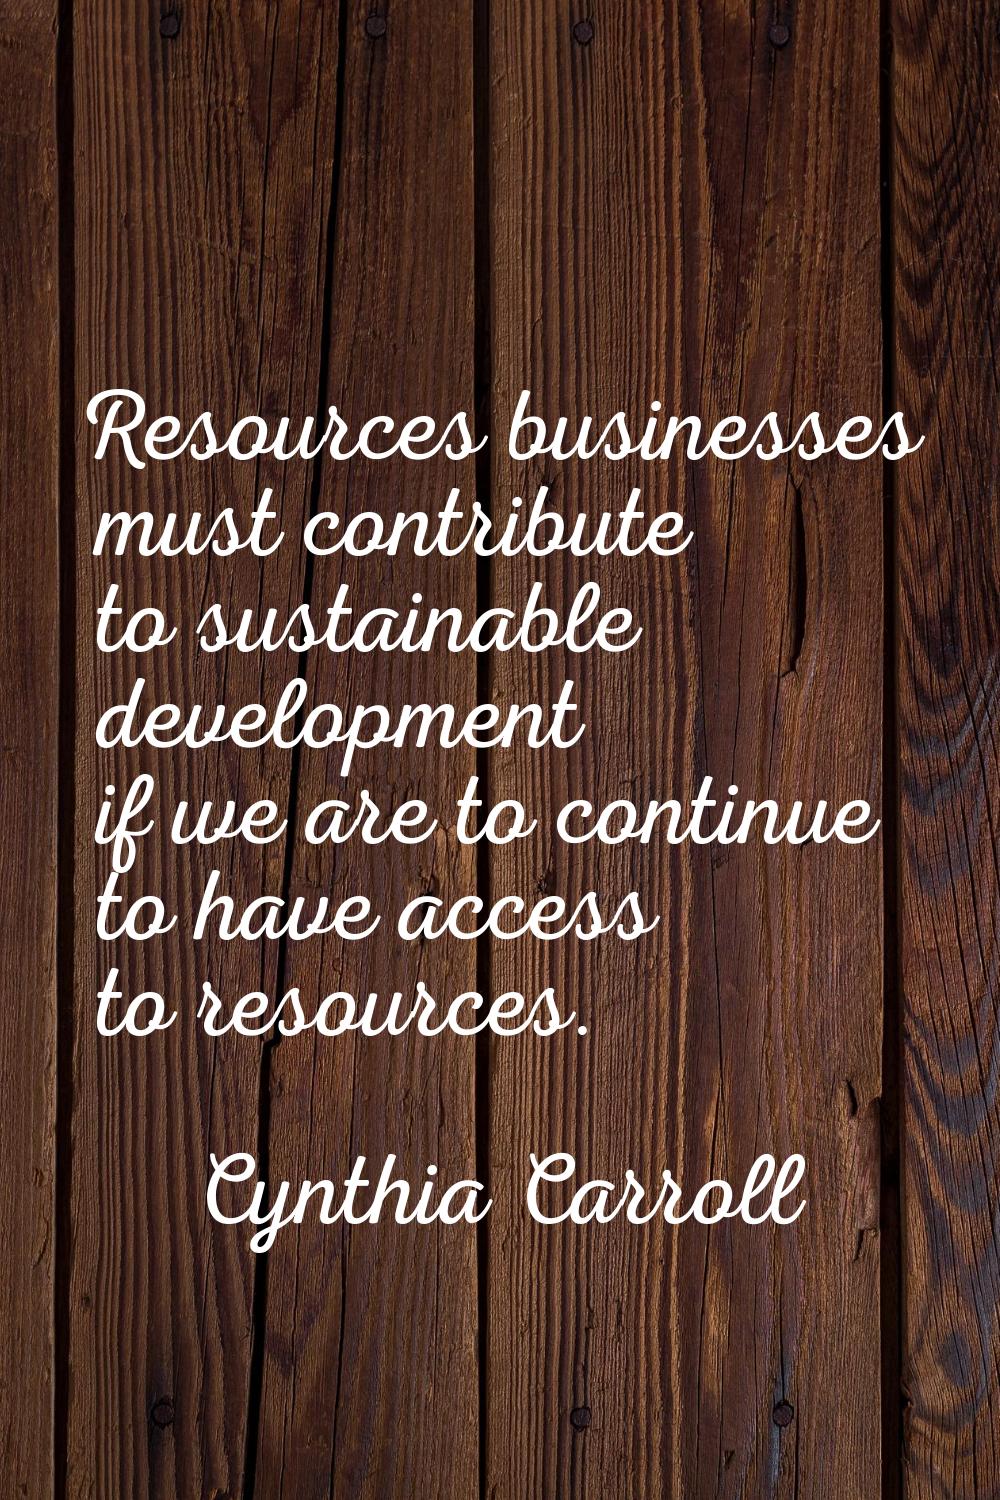 Resources businesses must contribute to sustainable development if we are to continue to have acces